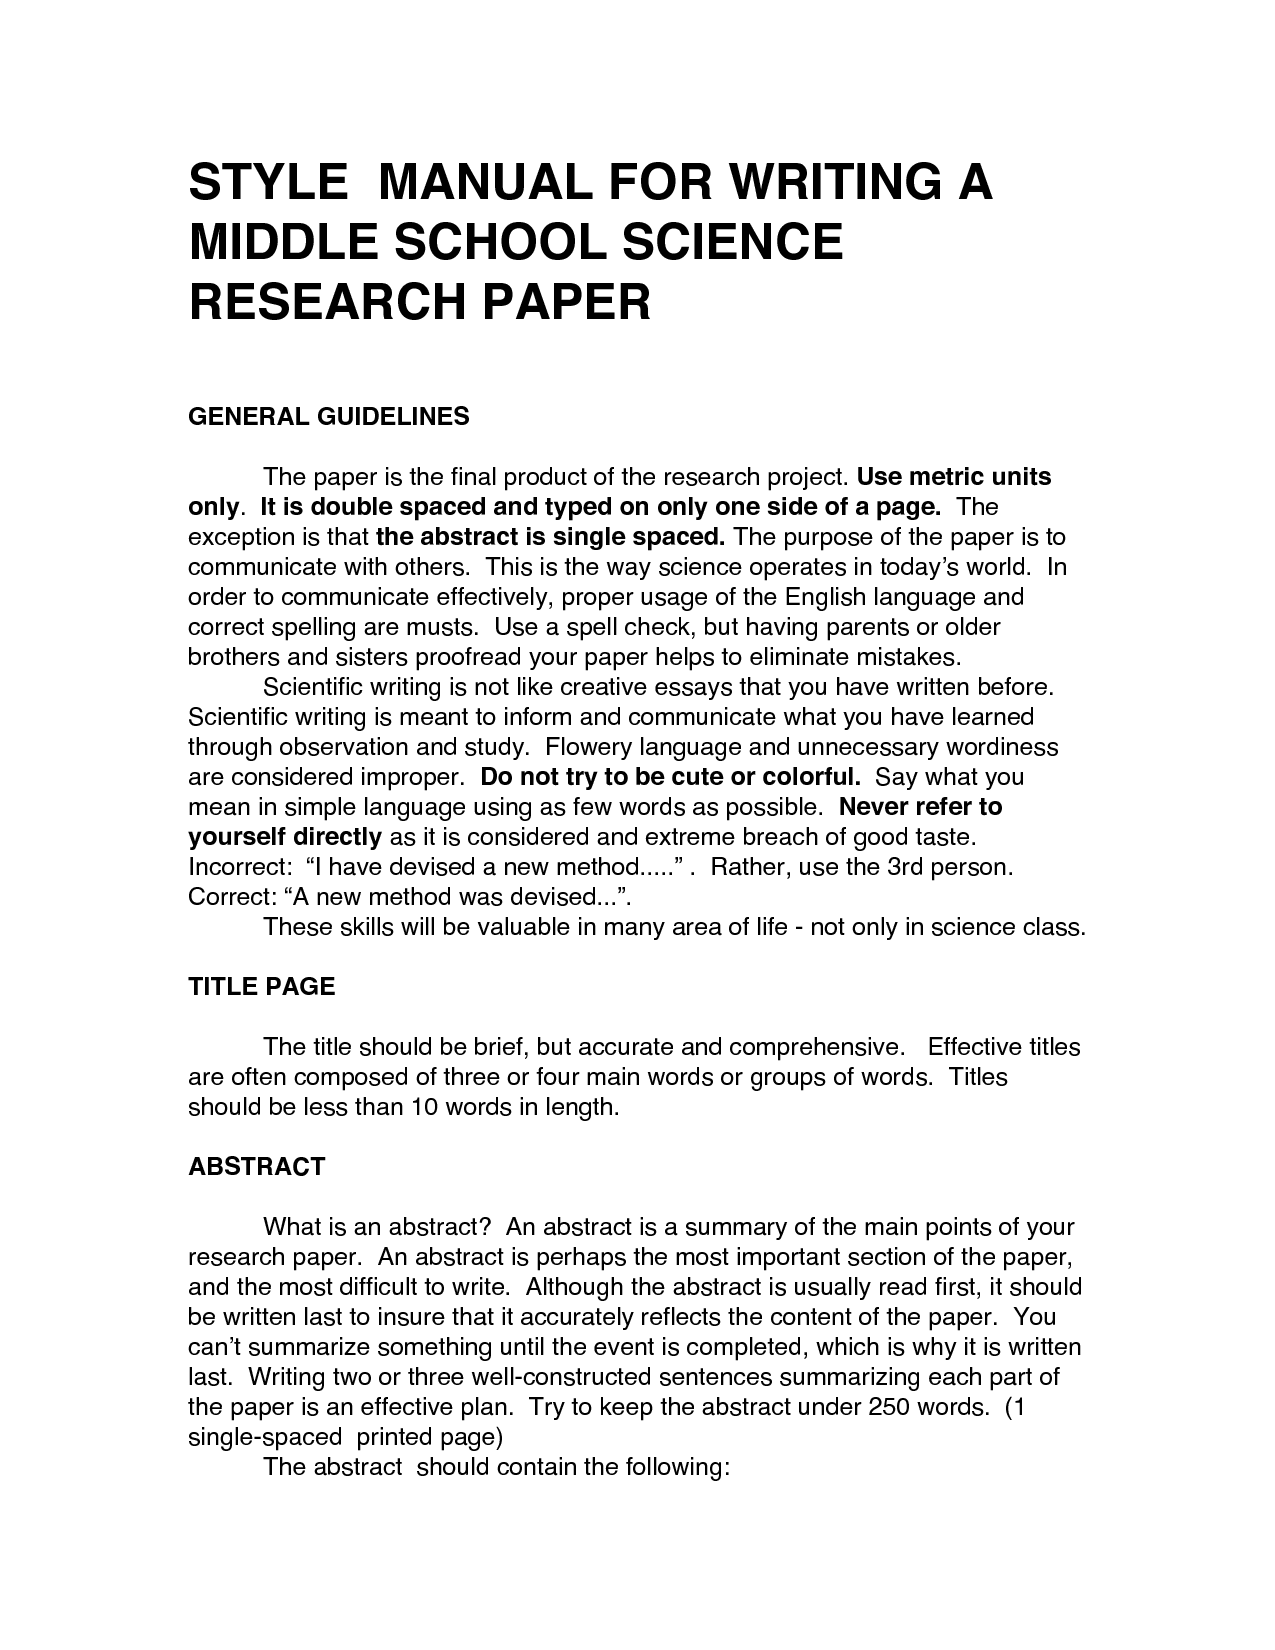 Custom middle school research paper